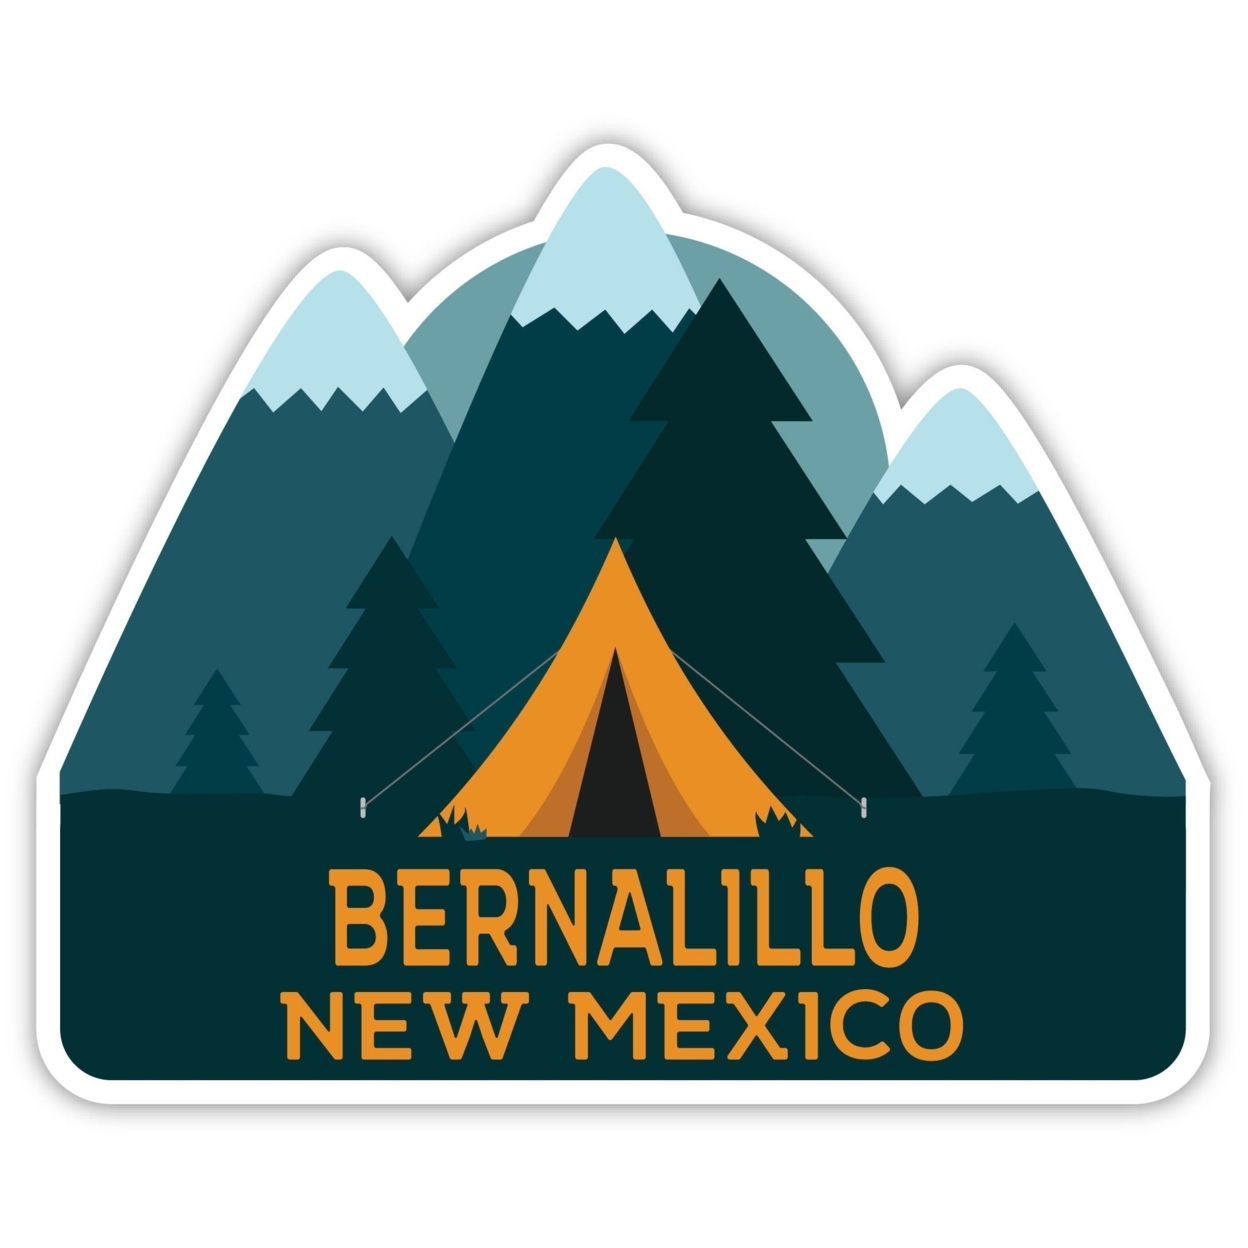 Bernalillo New Mexico Souvenir Decorative Stickers (Choose Theme And Size) - 4-Pack, 12-Inch, Bear